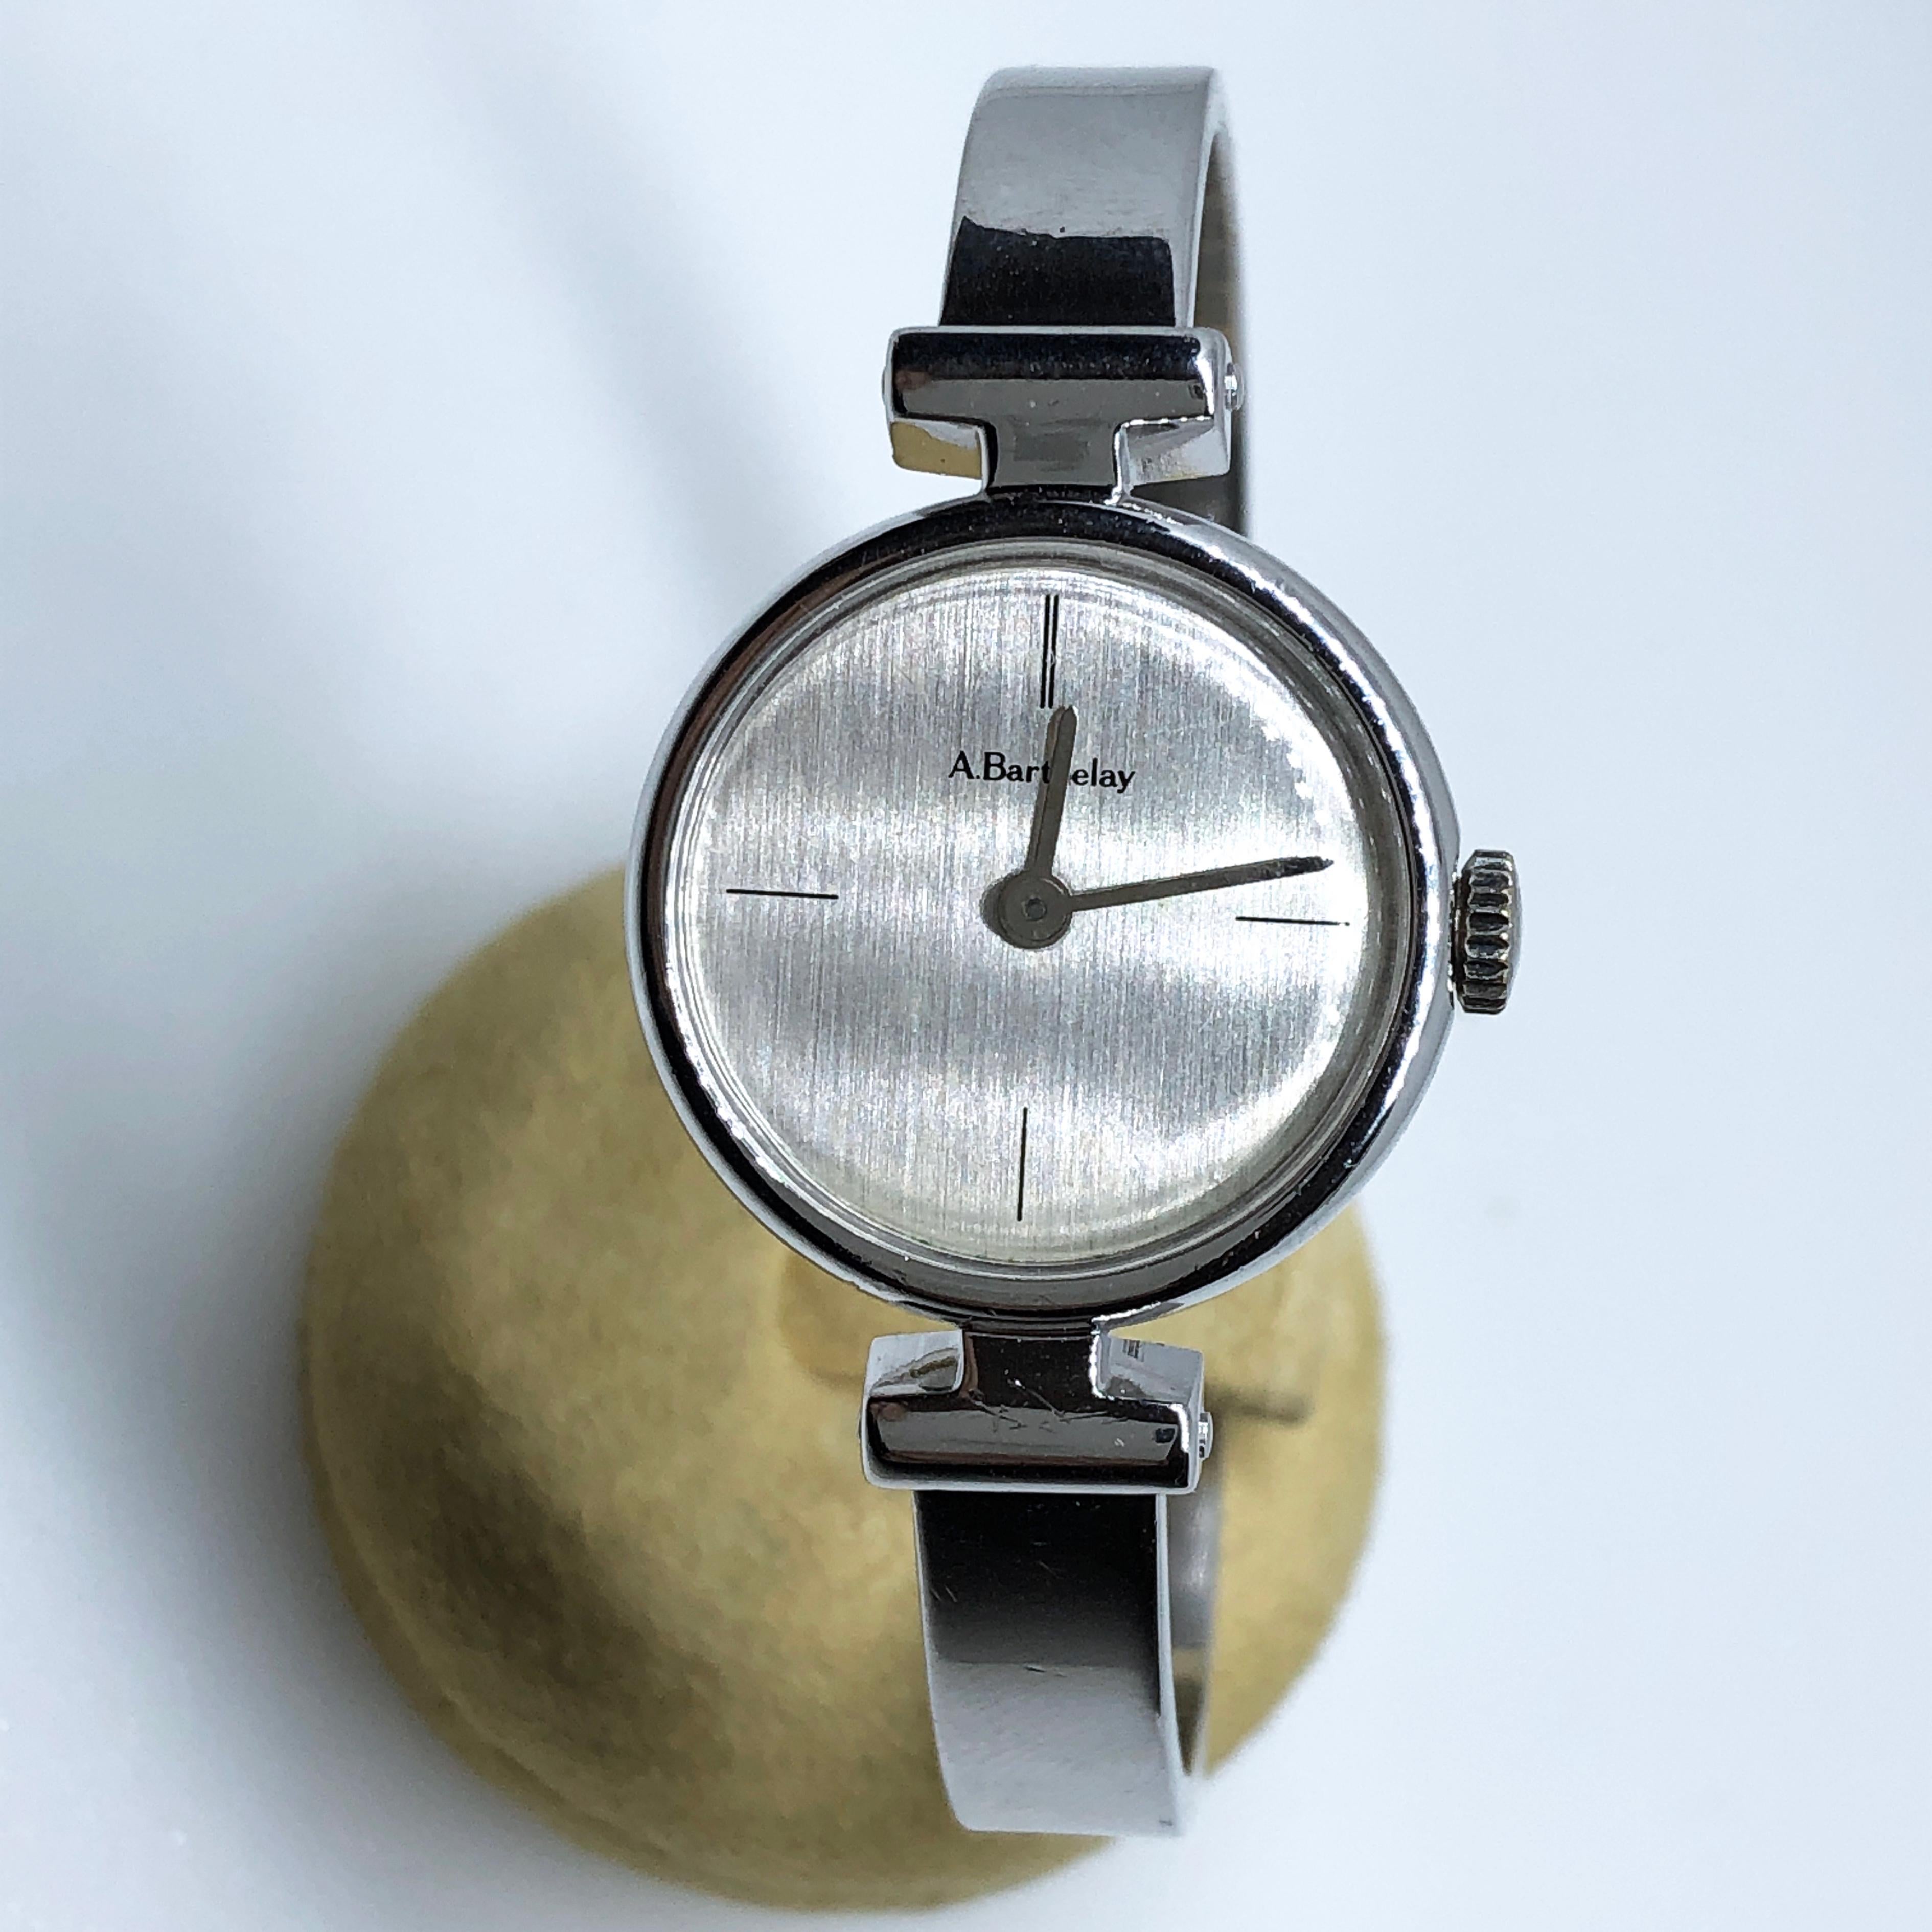 Modern Original 1974 Alexis Barthelay Hand-Wound Movement Sterling Silver Watch For Sale